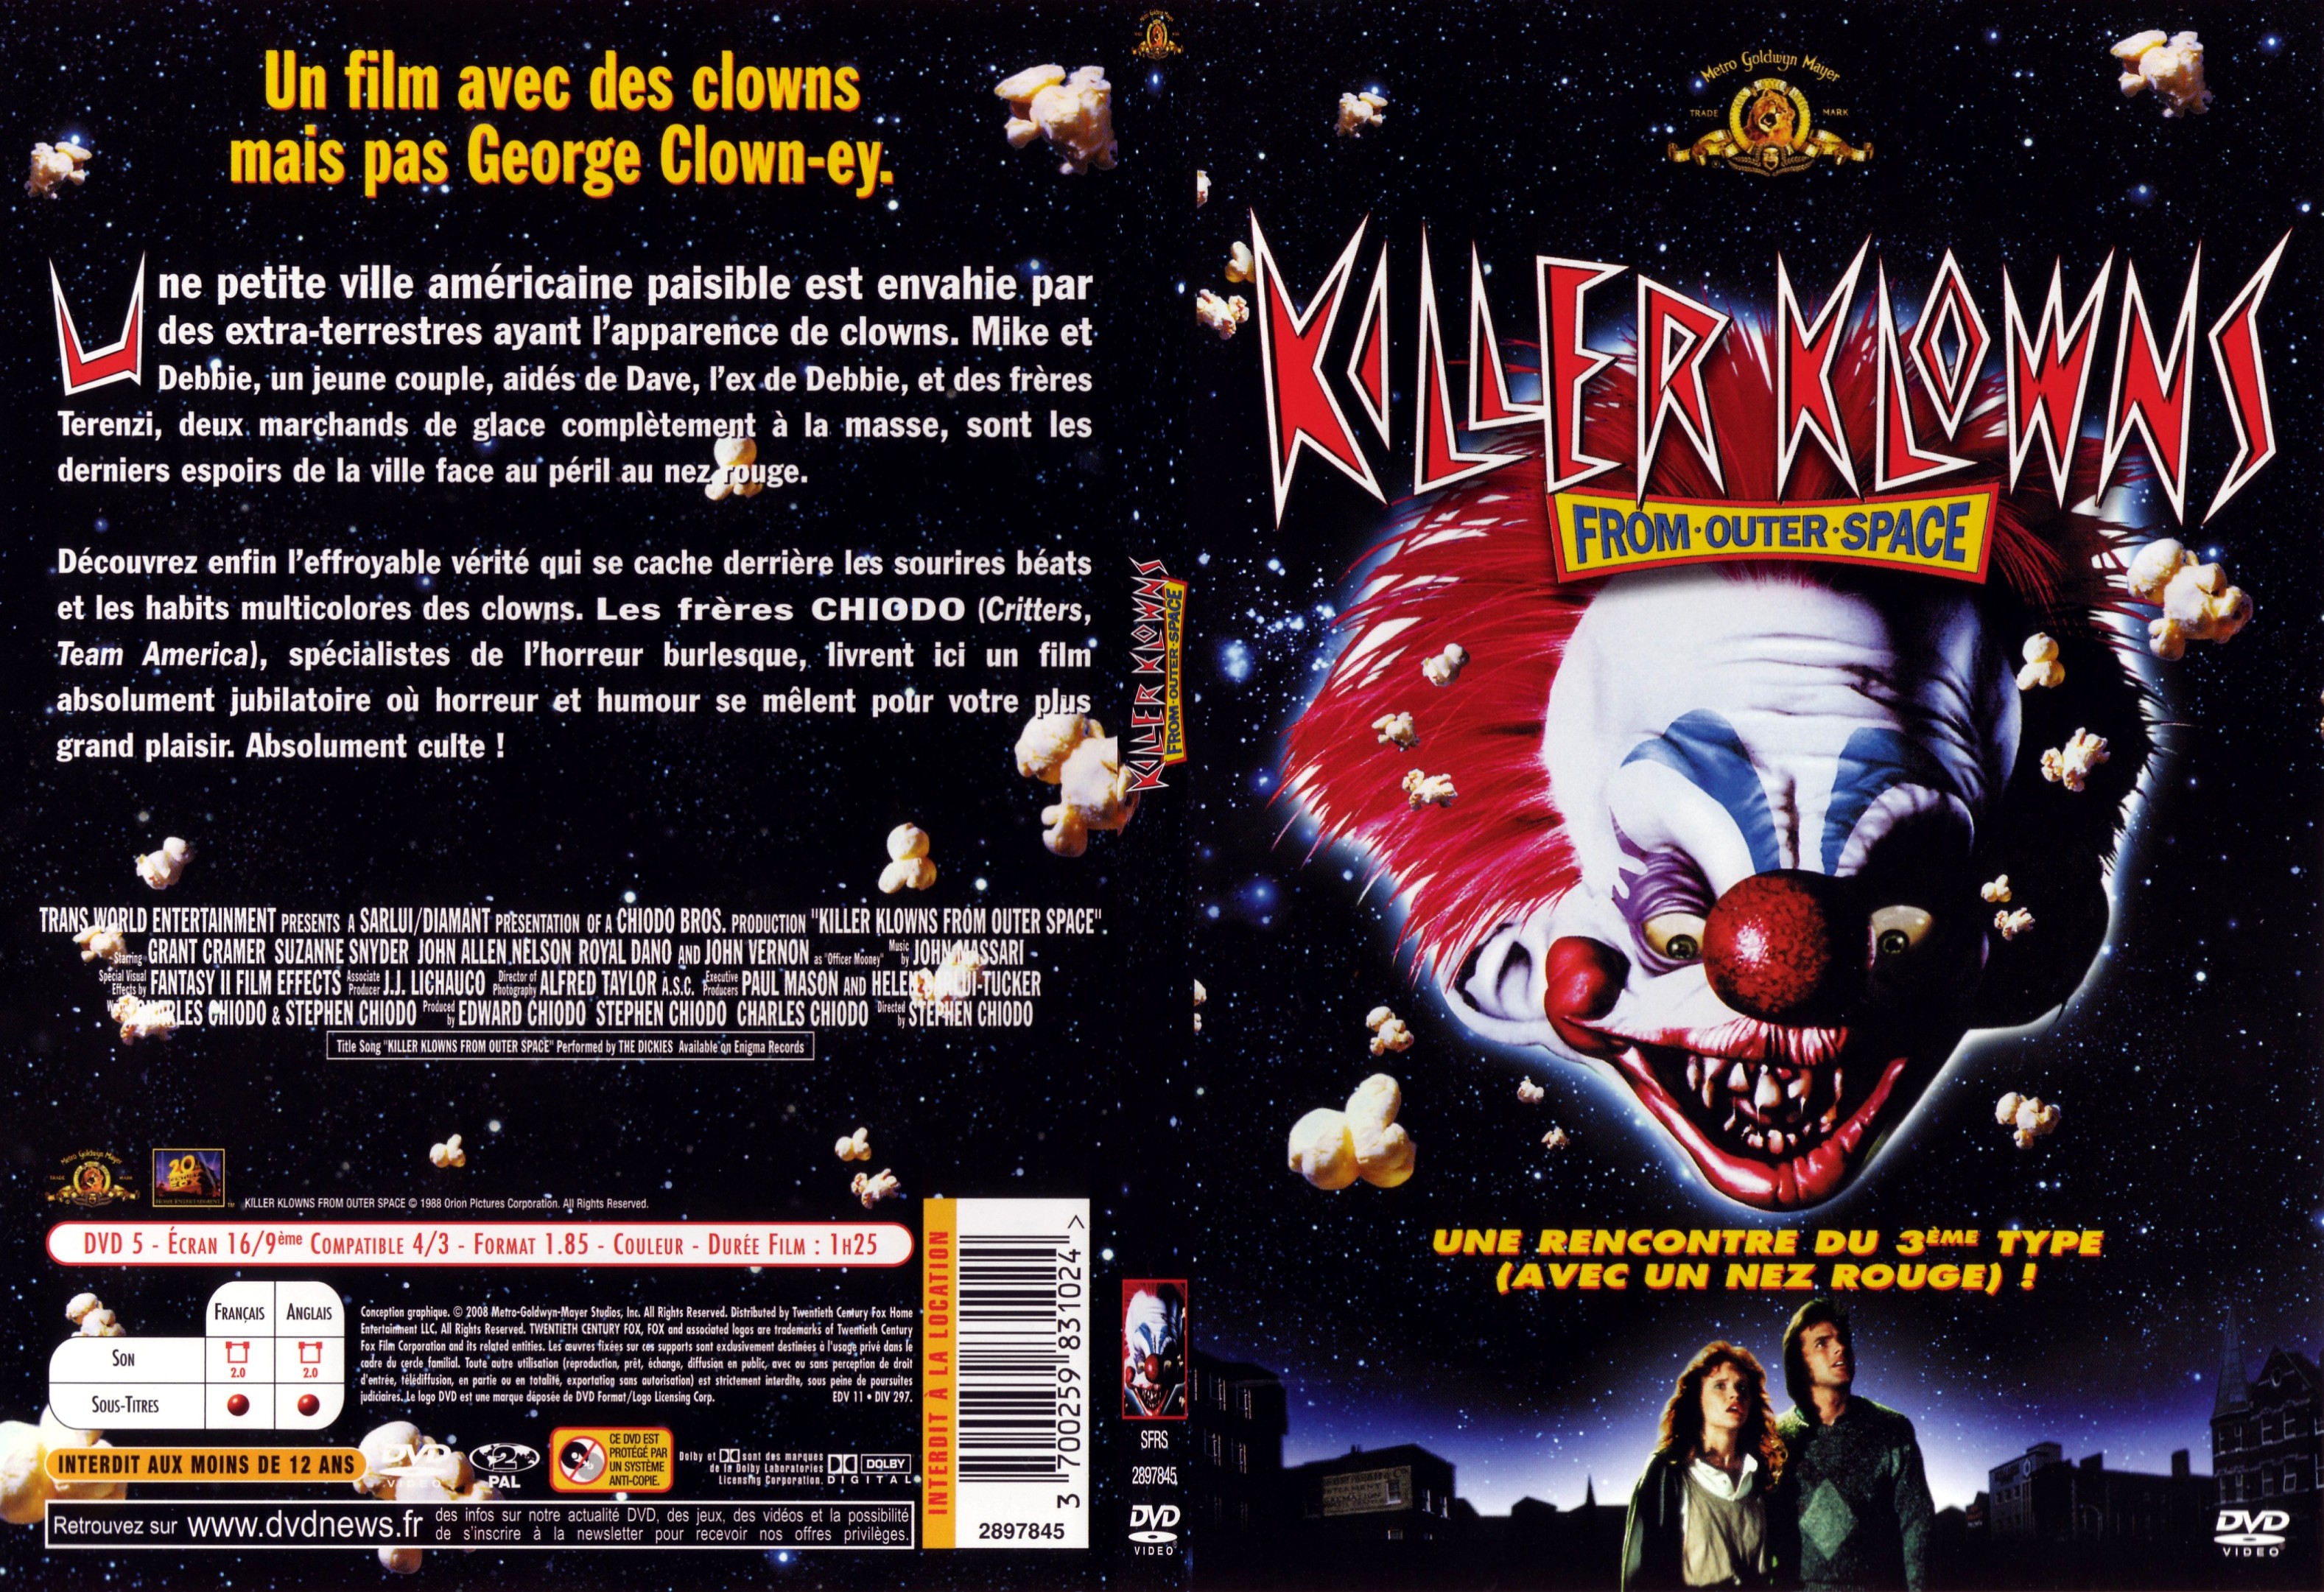 Jaquette DVD Killer klowns from outer space - SLIM